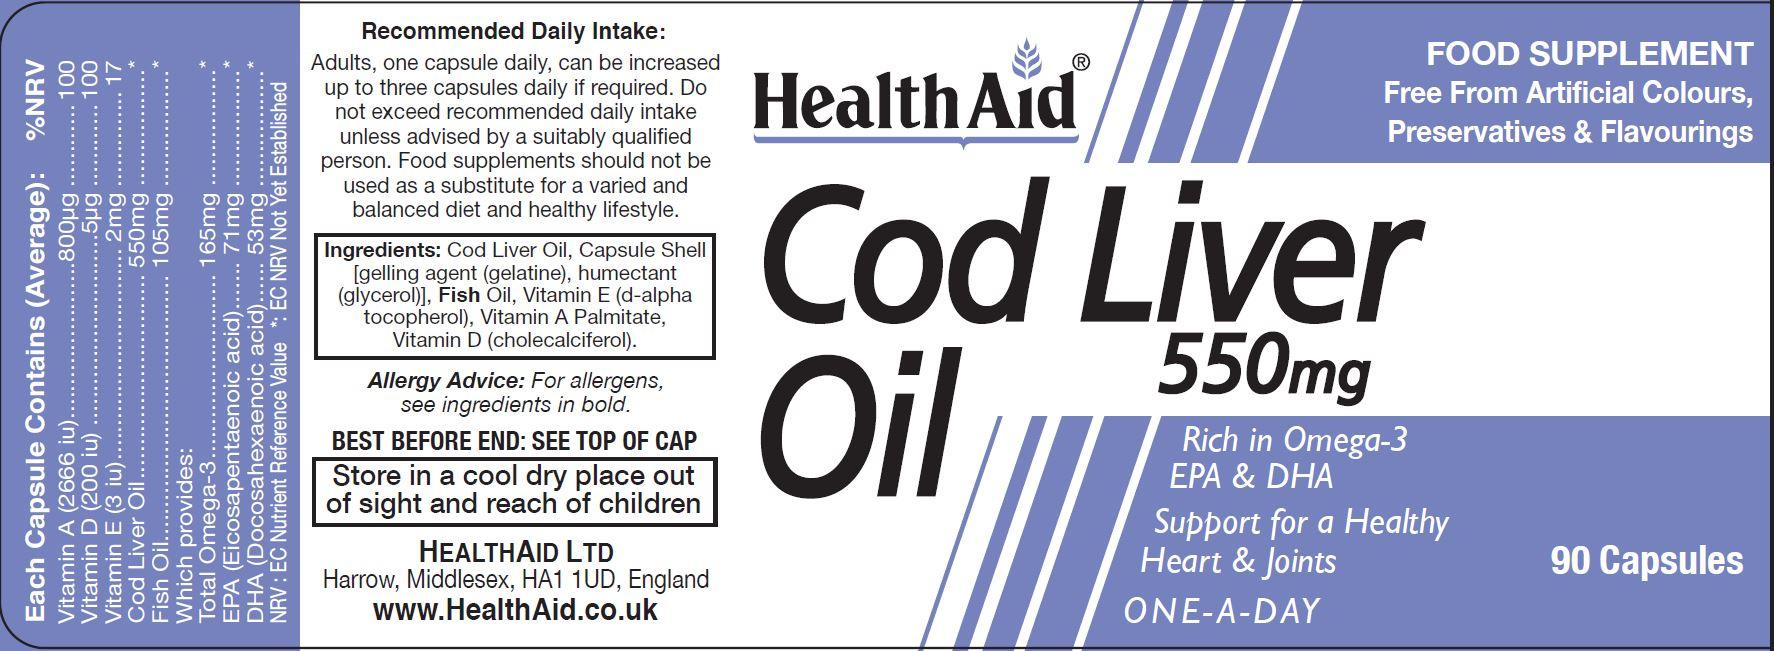 Health Aid Cod Liver Oil 550mg 90's - Approved Vitamins